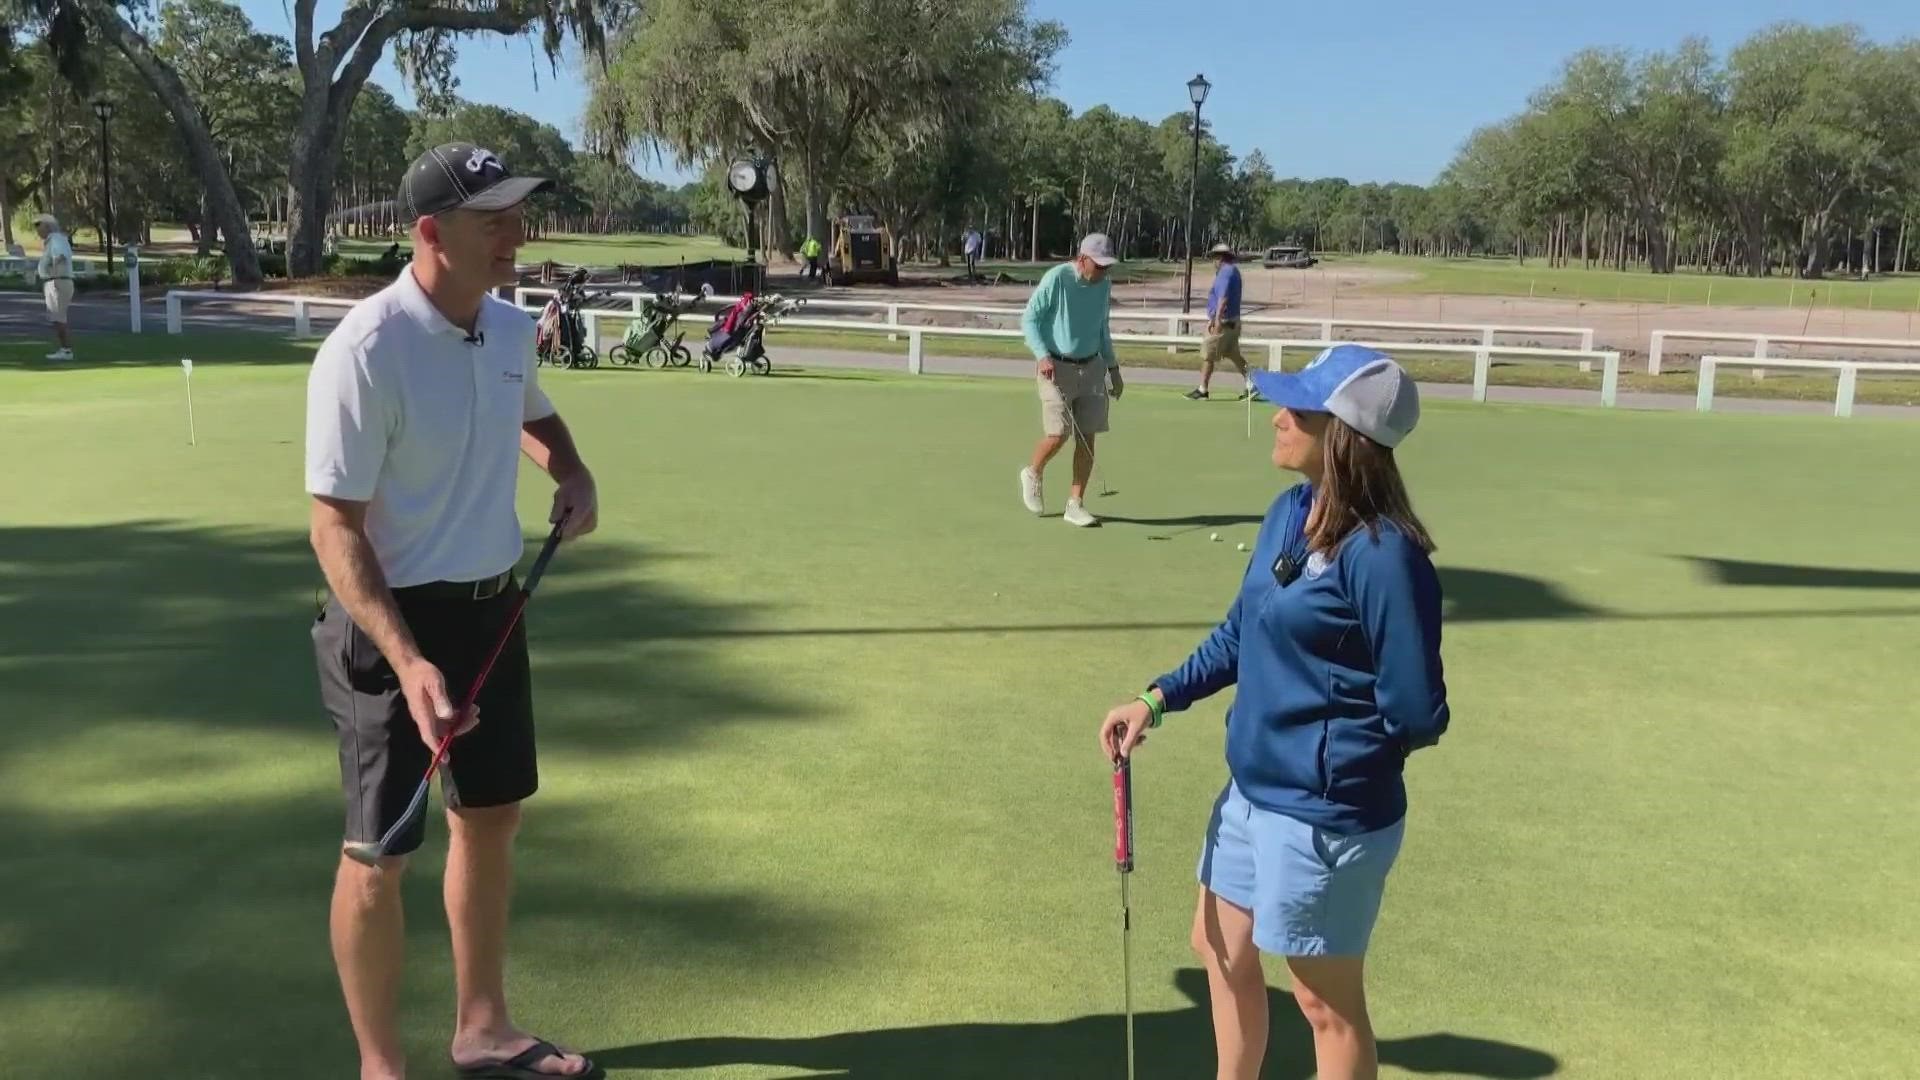 Professional golfer and Jacksonville resident Jim Furyk goes one-on-one with FCN's Mia O'Brien about his PGA Champions Tour event at Timuquana CC and more!